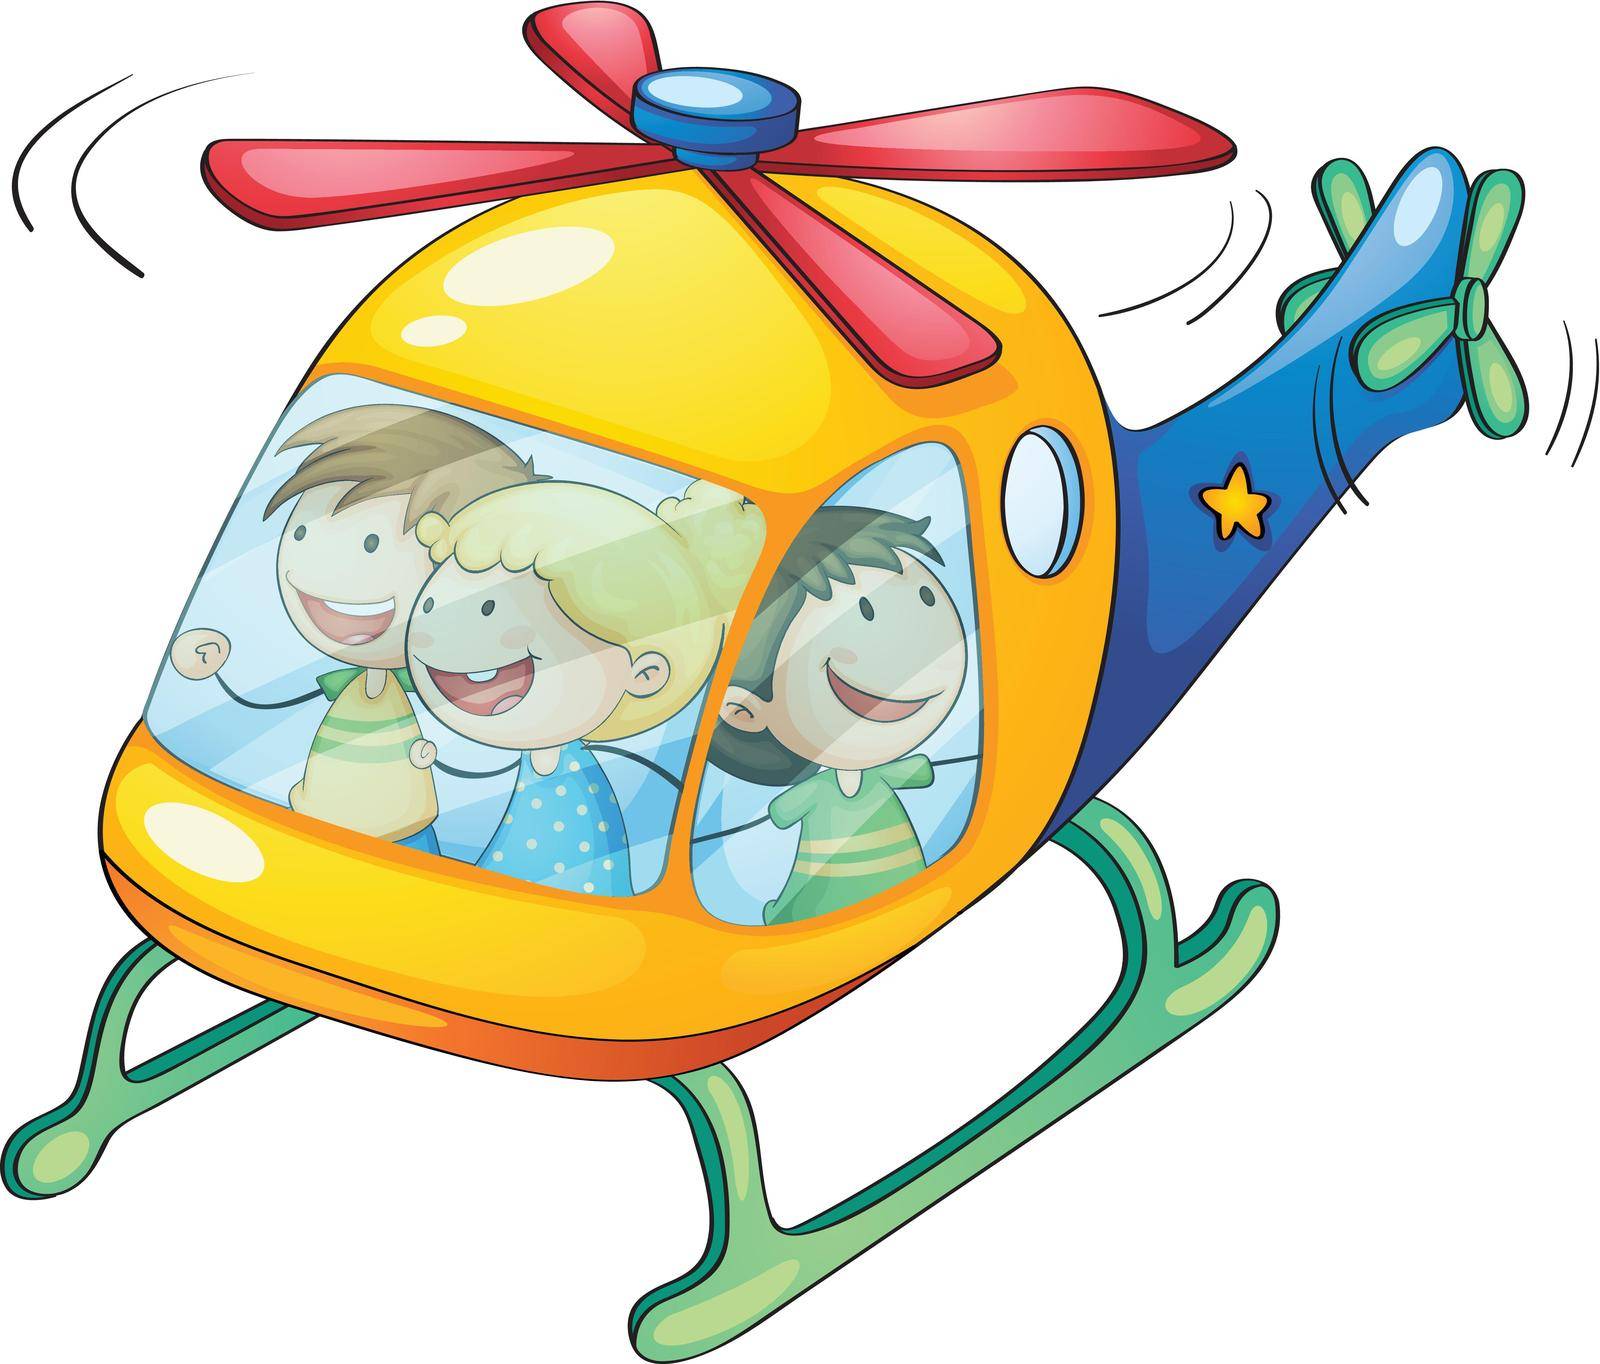 kids in a helicopter by iimages